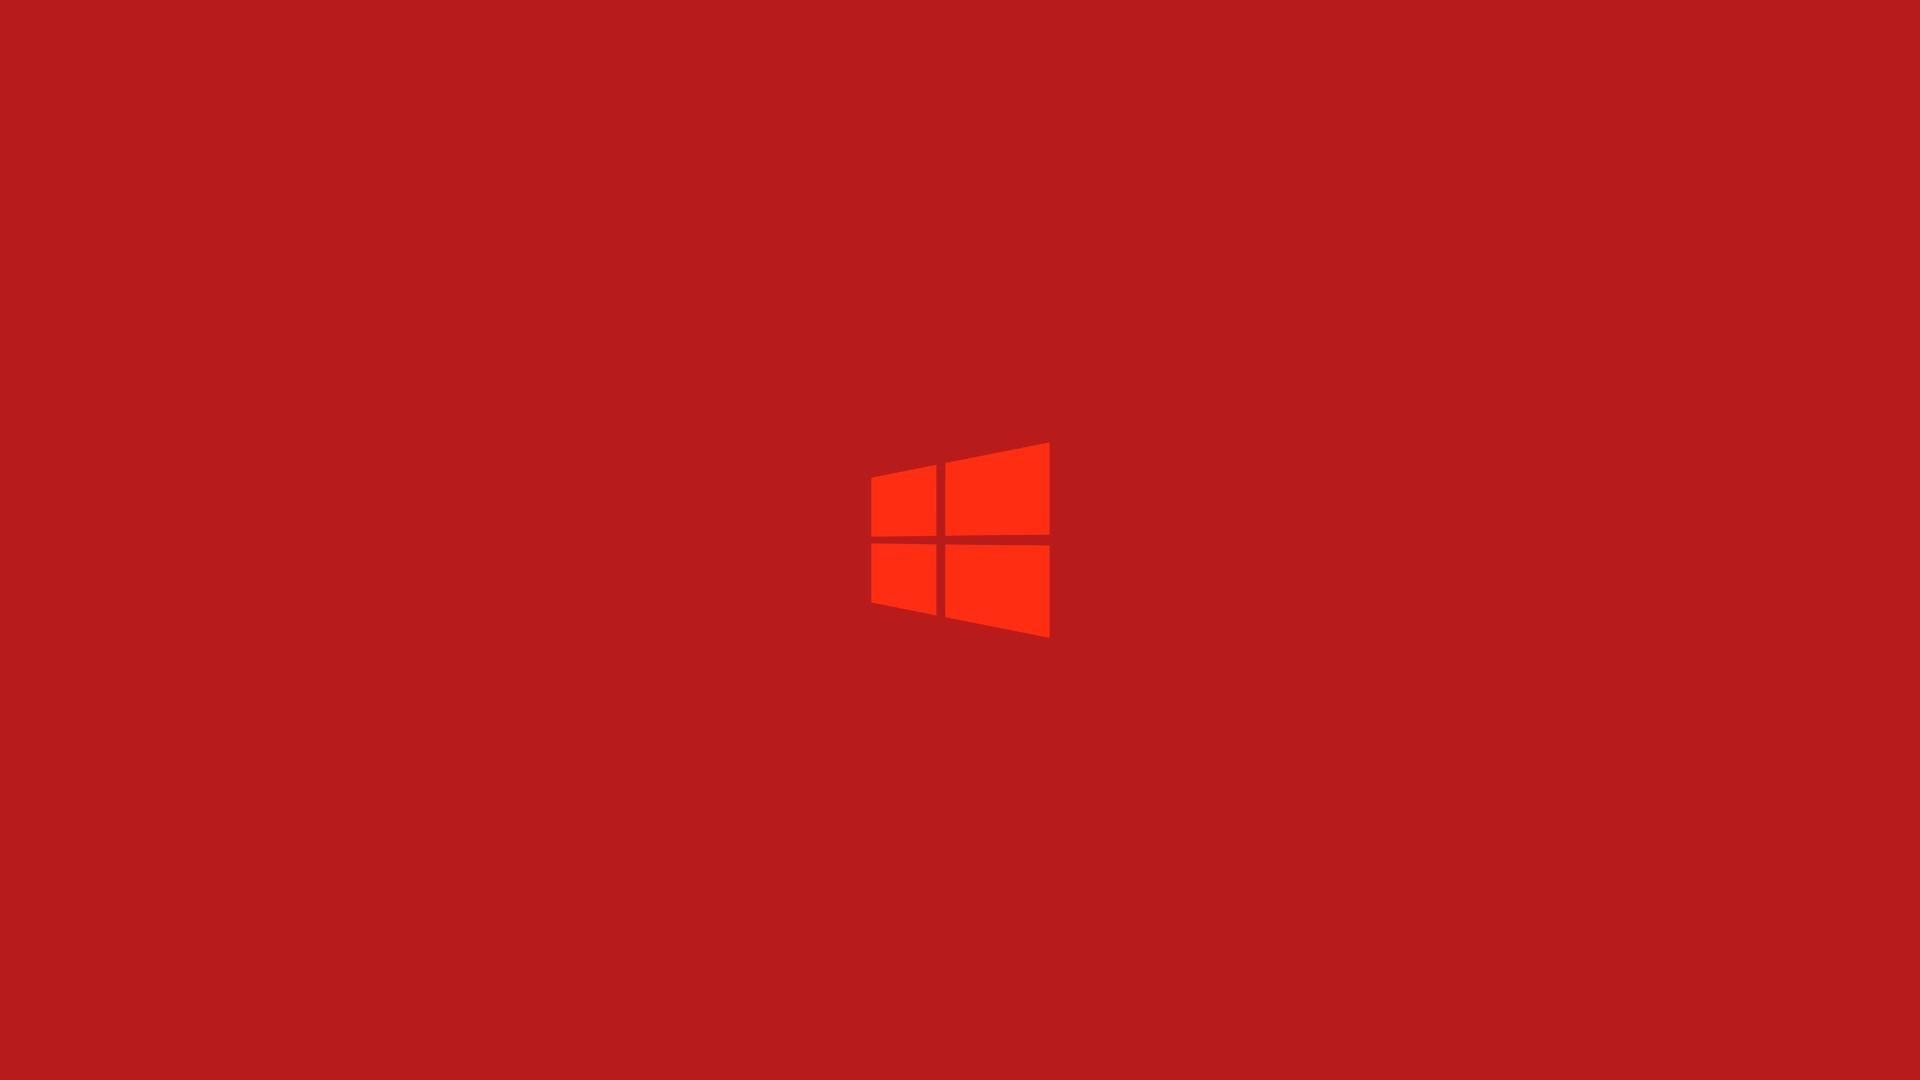 Red Windows Wallpapers Top Free Red Windows Backgrounds